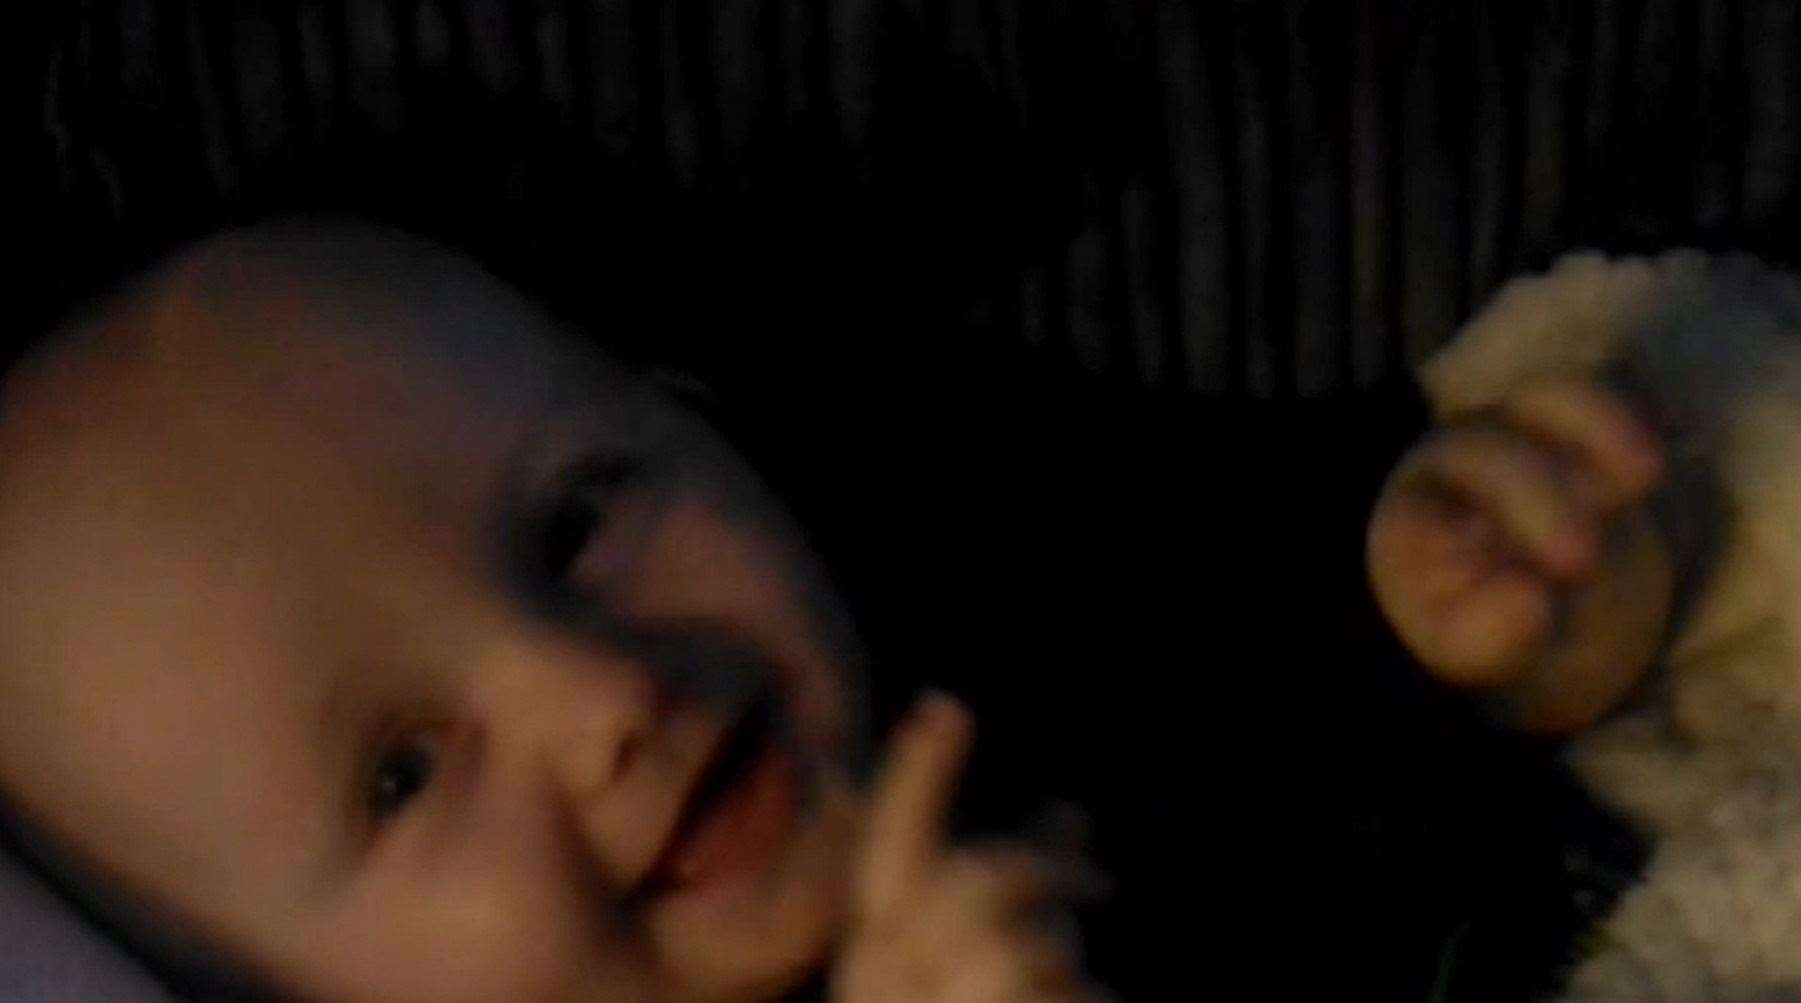 A screengrab from a video from October 25, 2020, showing Finley happy and laughing (Derbyshire Police/PA)